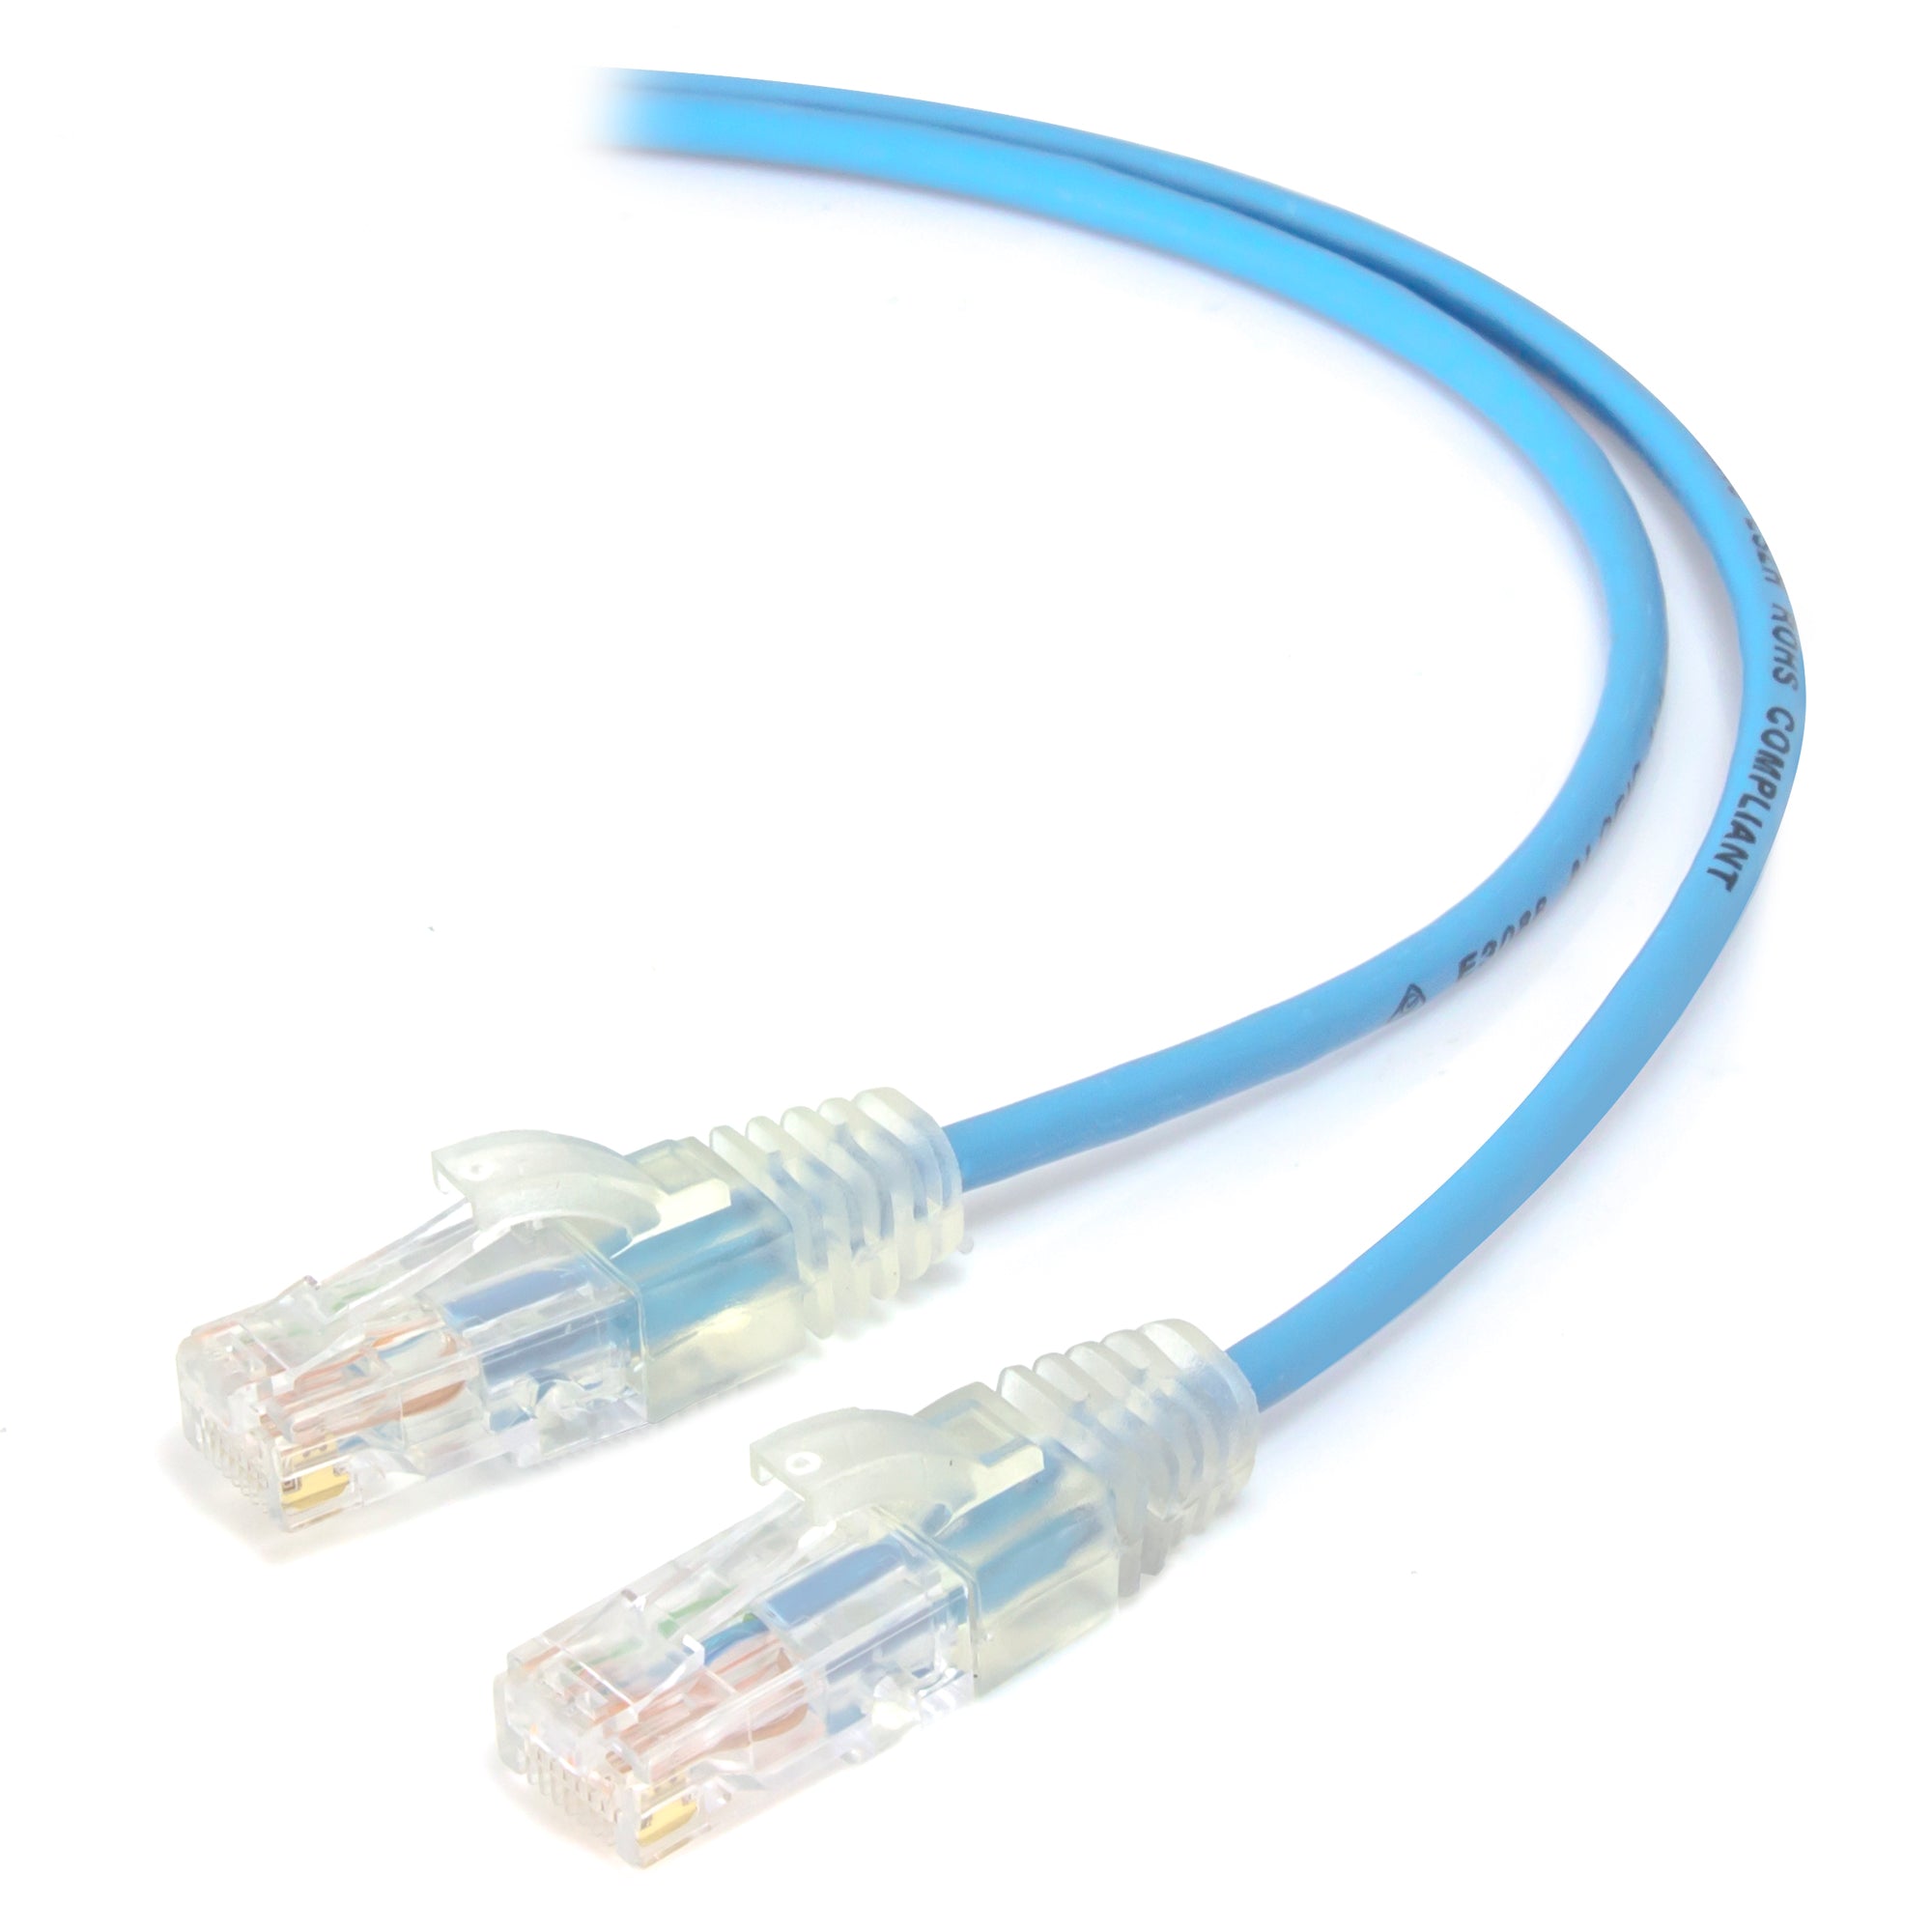 1.5m Blue Ultra Slim Cat6 Network Cable, UTP, 28AWG